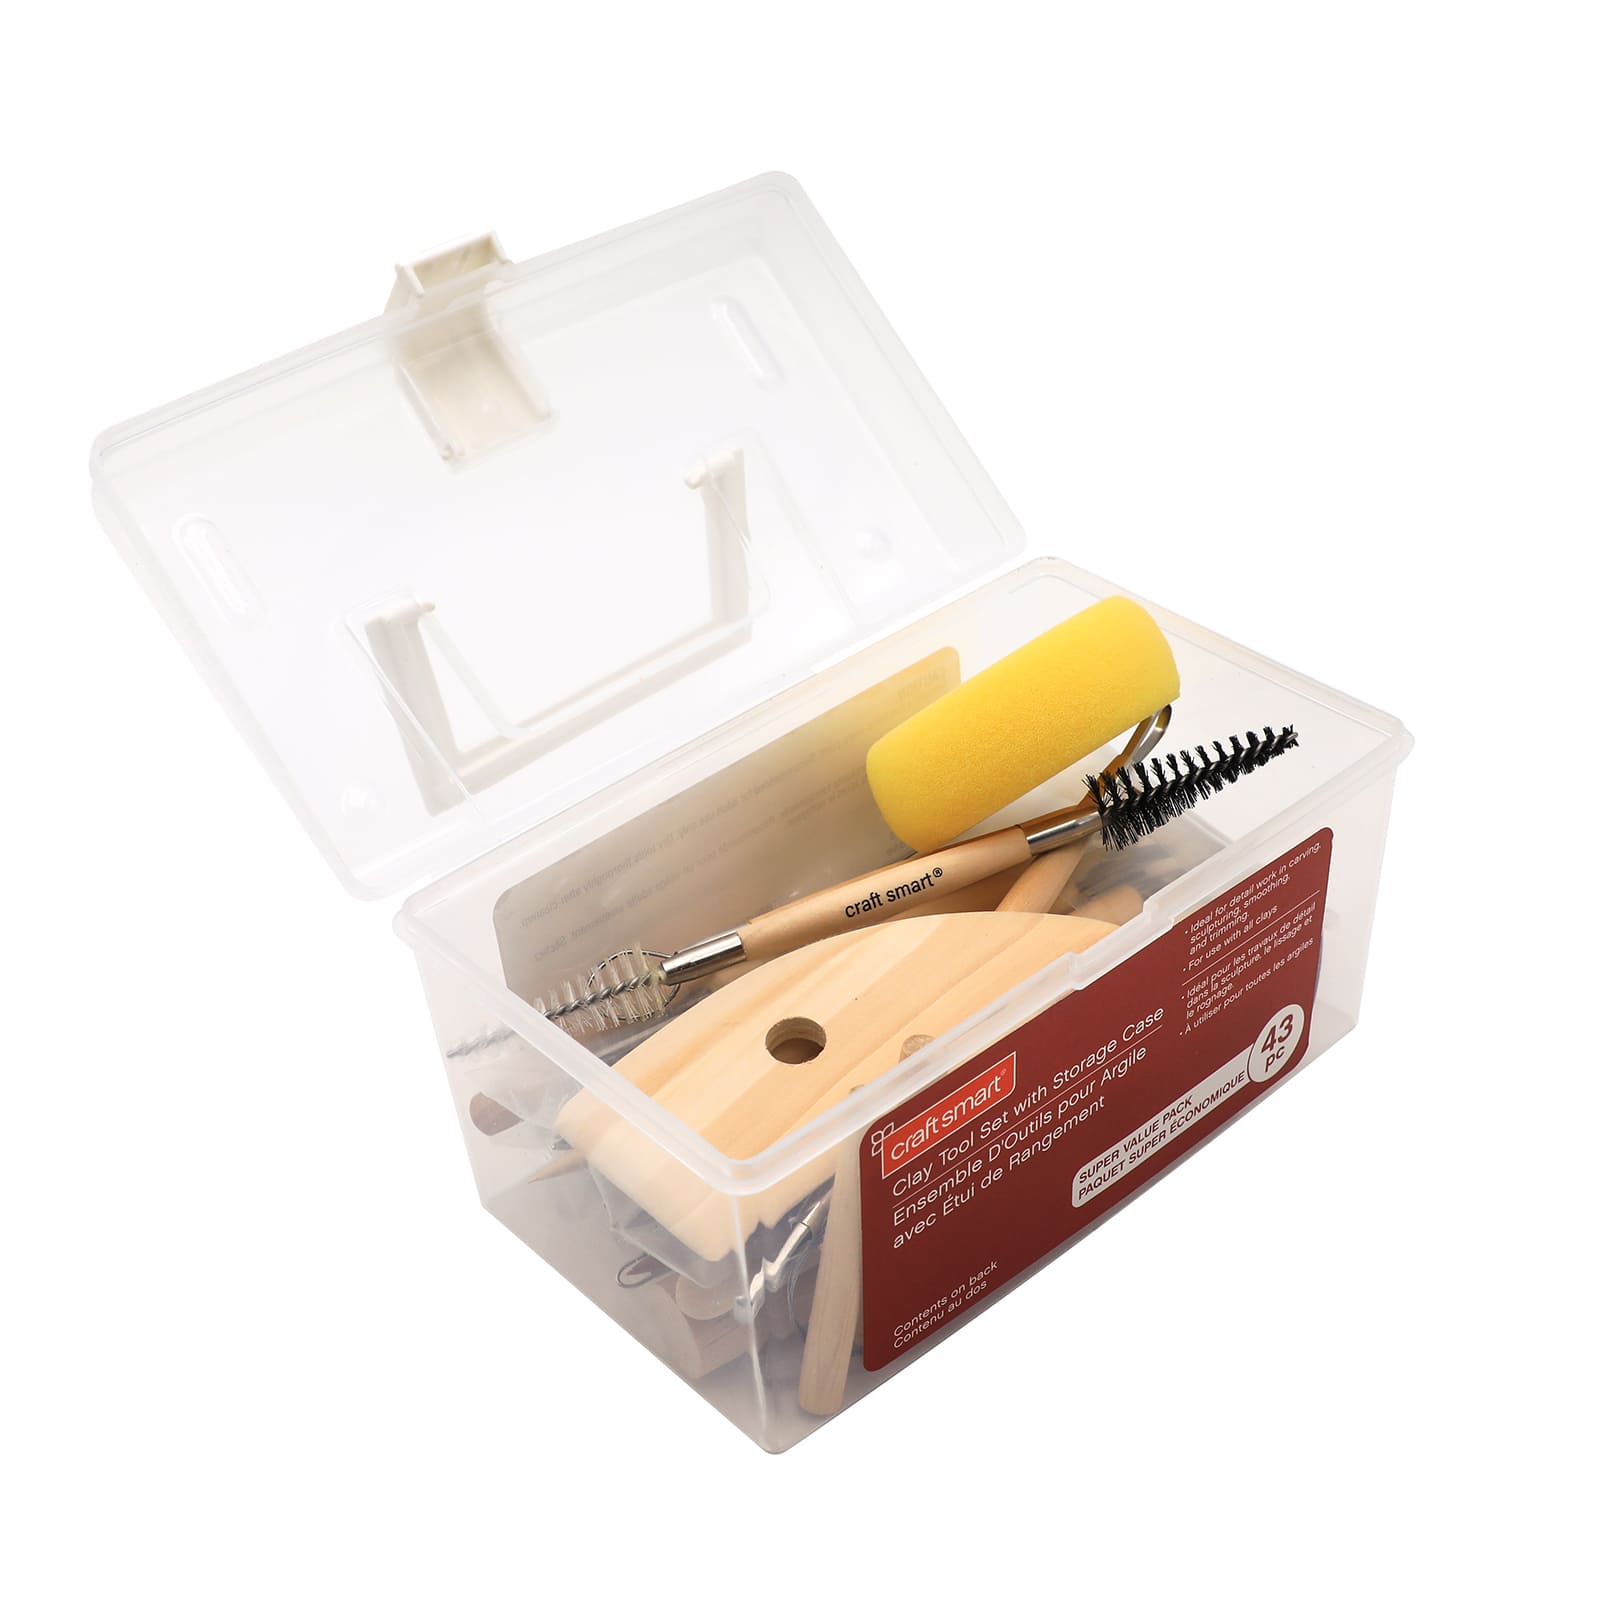 Professional Pottery Tool Kit in Wooden Box - Cromartie Hobbycraft Limited